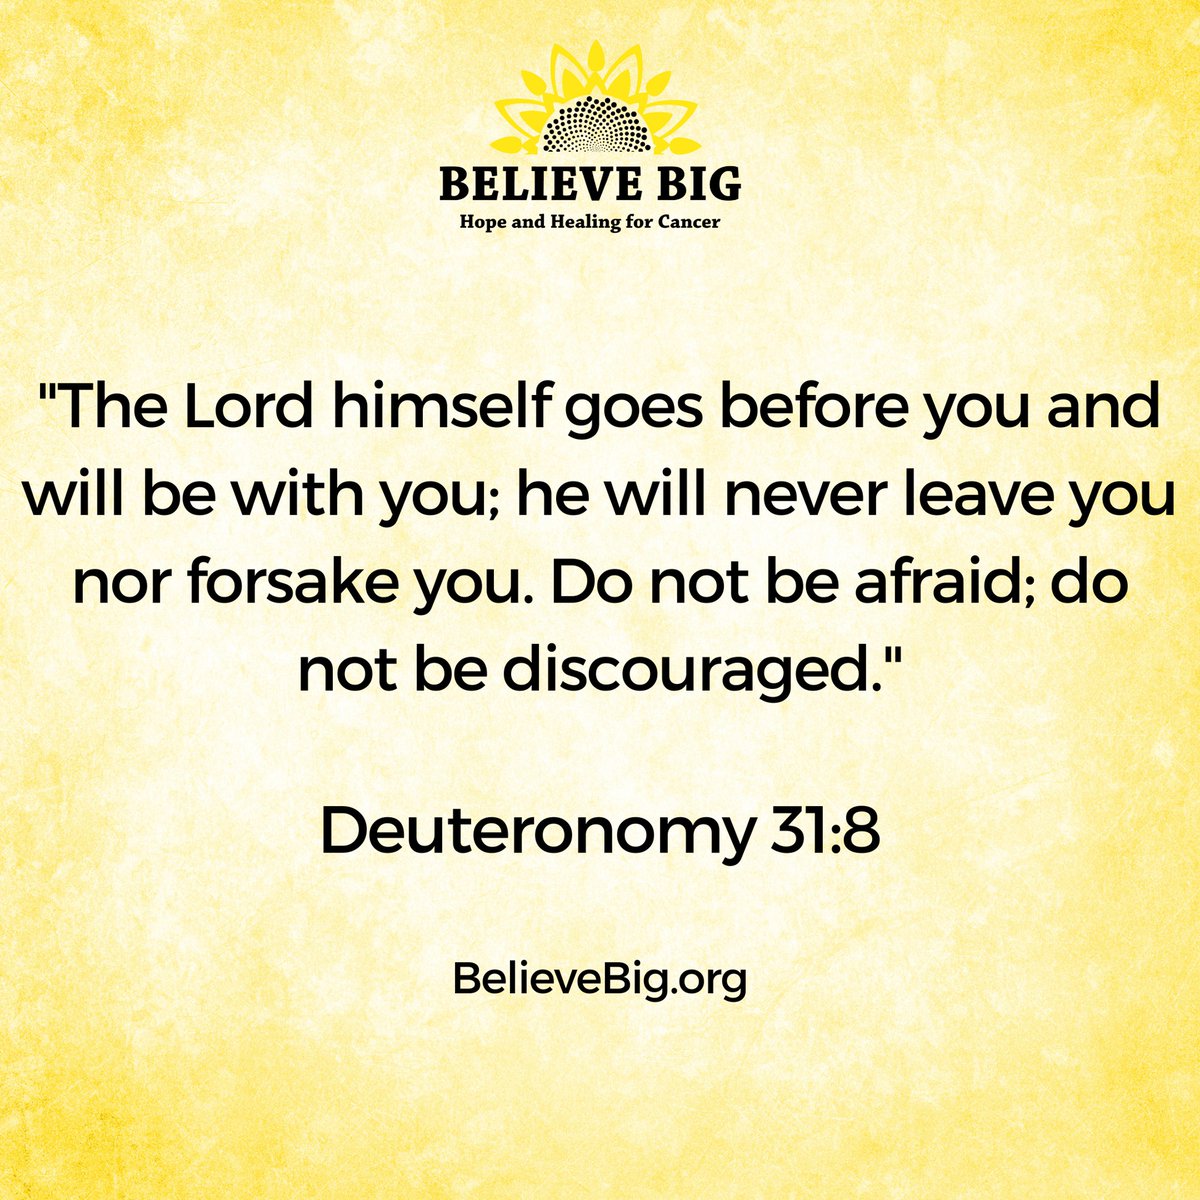 'The Lord himself goes before you and will be with you; he will never leave you nor forsake you. Do not be afraid; do not be discouraged.' - Deuteronomy 31:8